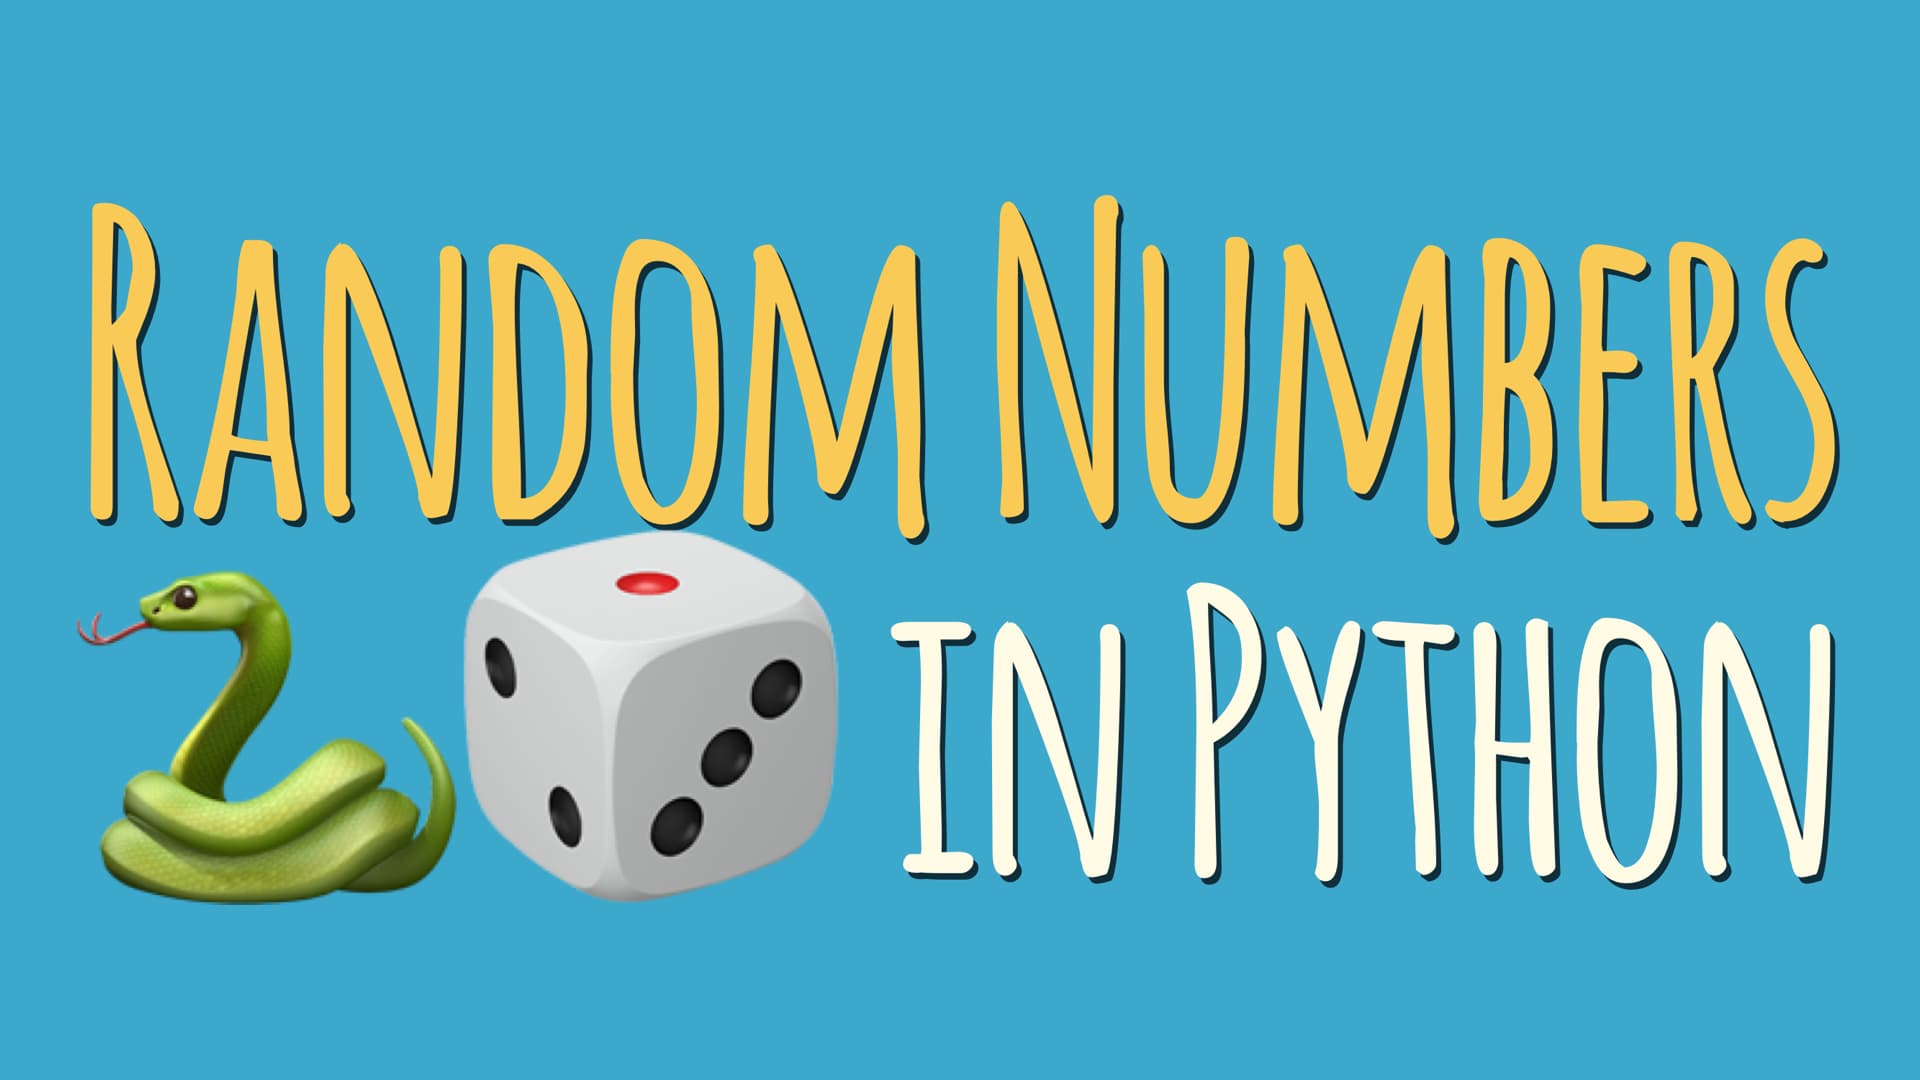 Working with Random Numbers in Python